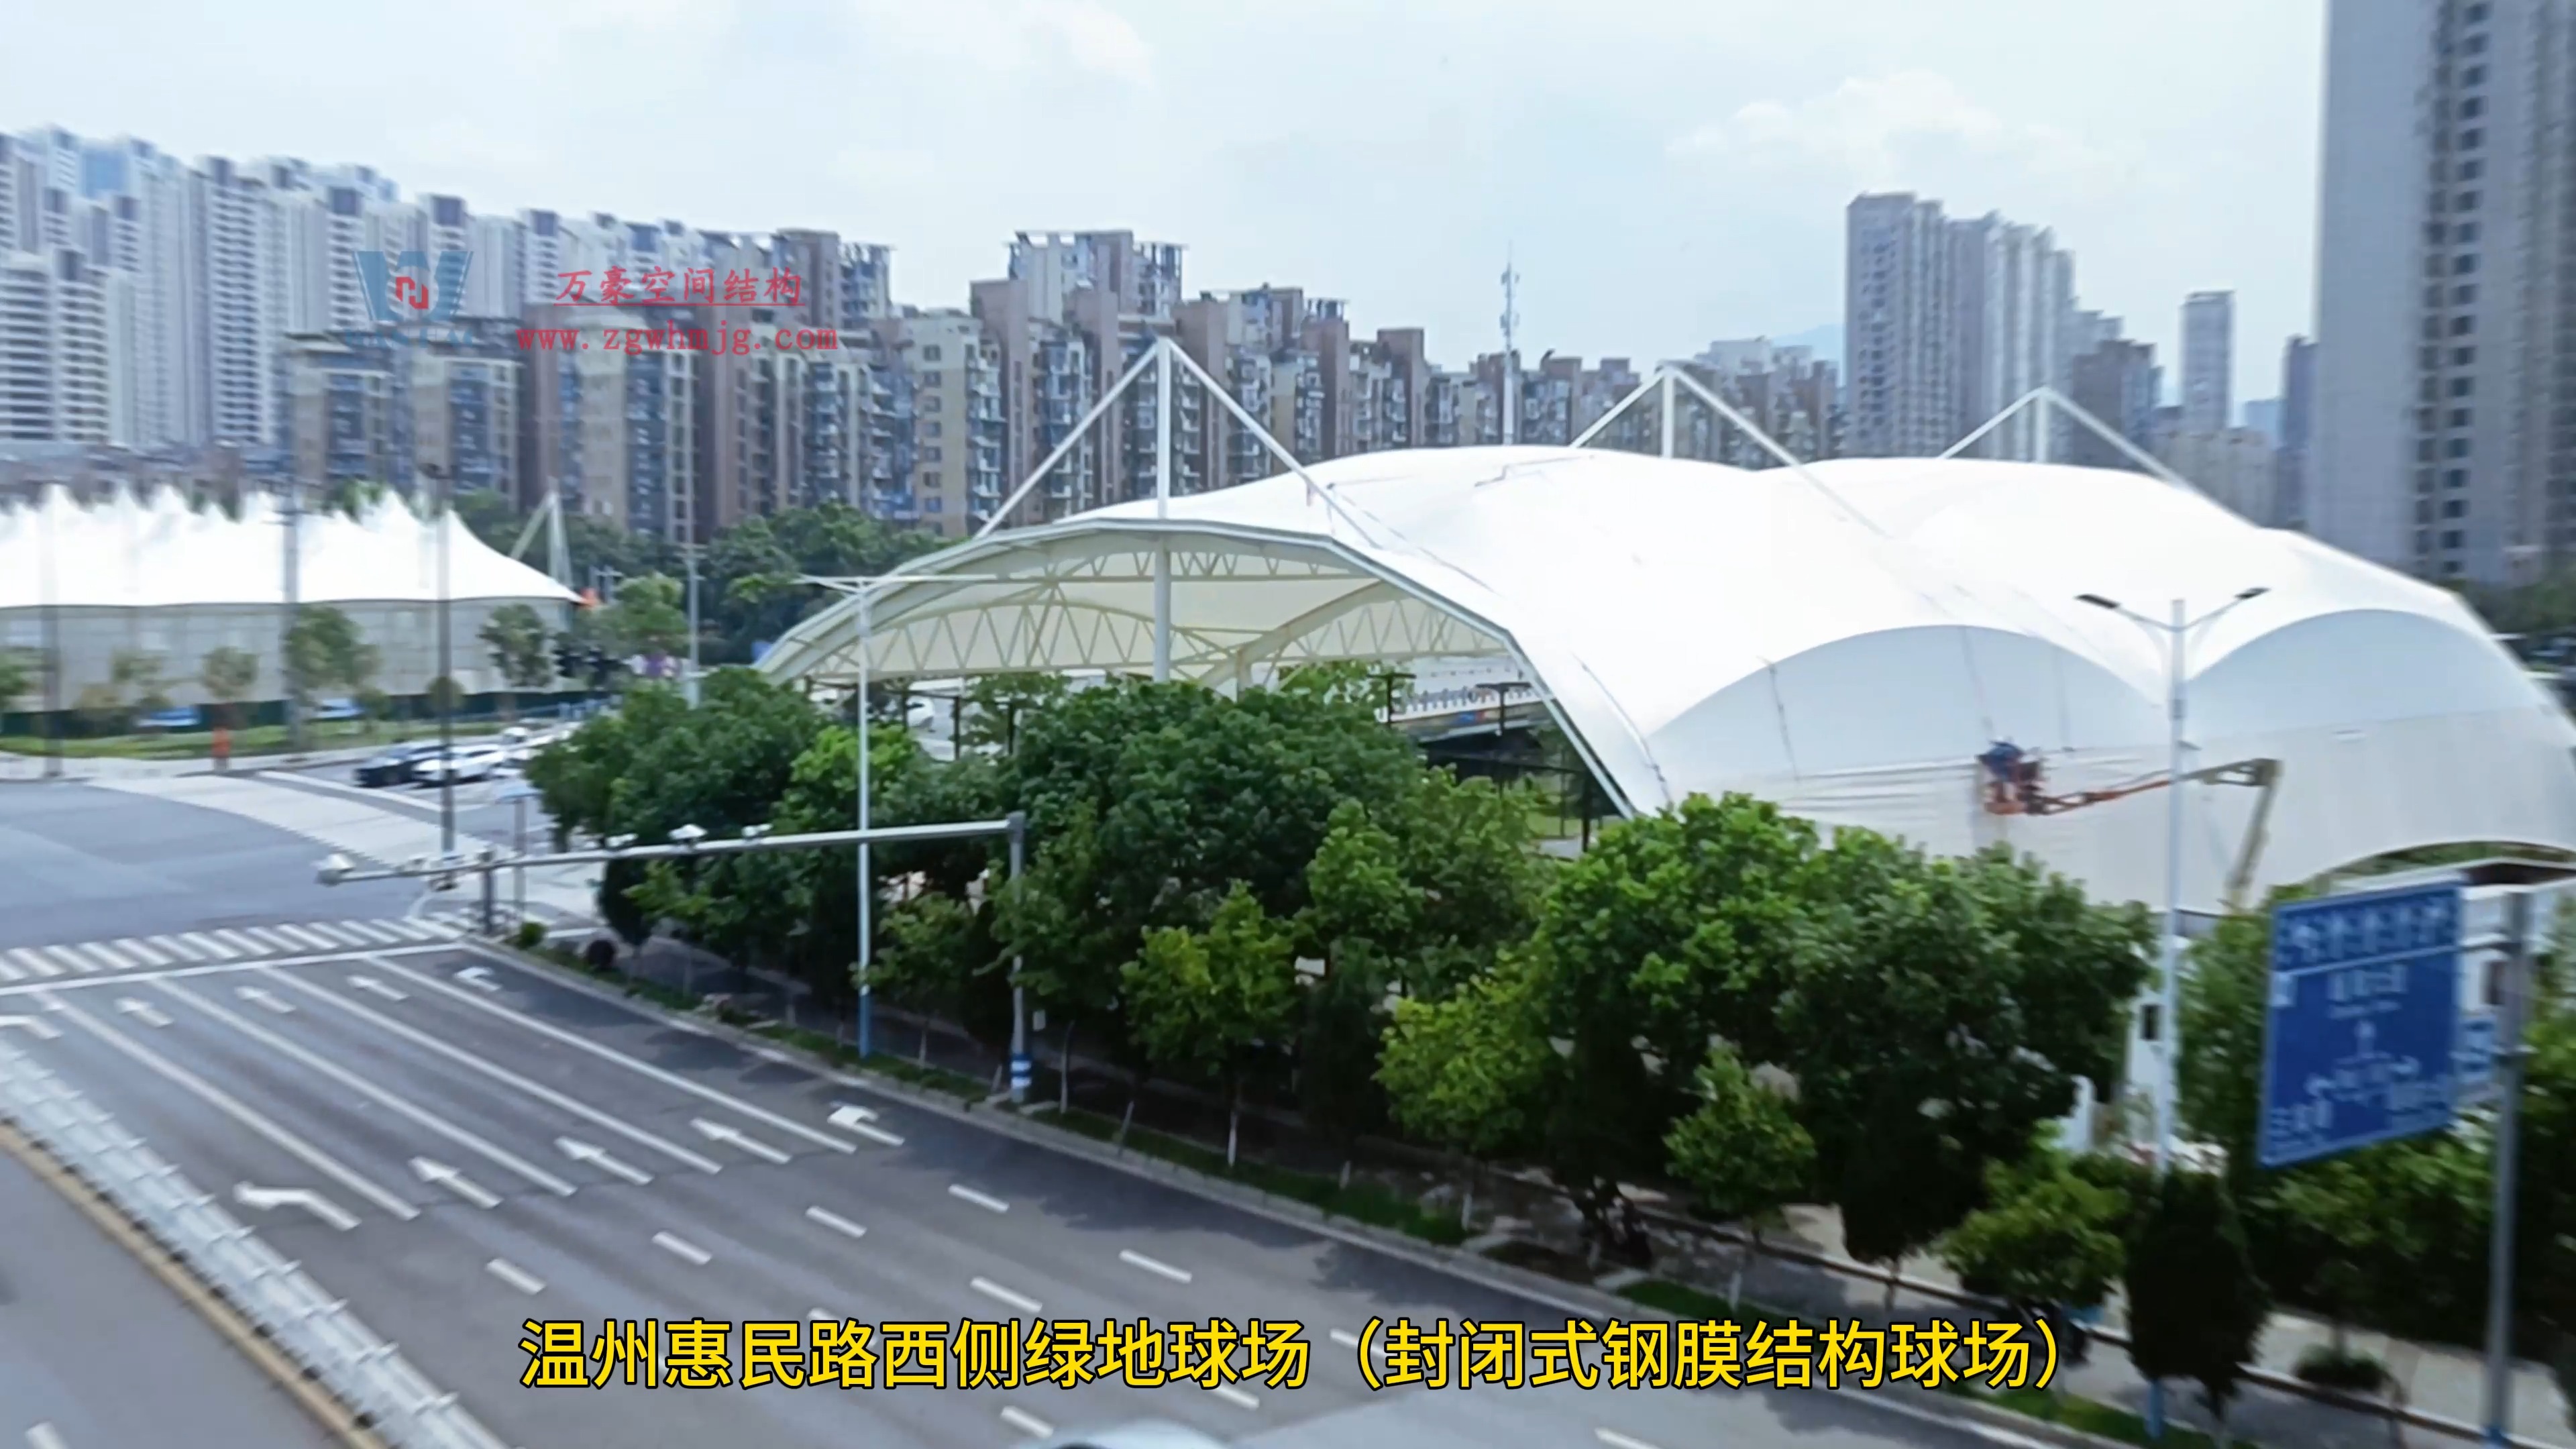 Wenzhou Huimin Road west green stadium ptfe membrane structure project completed video